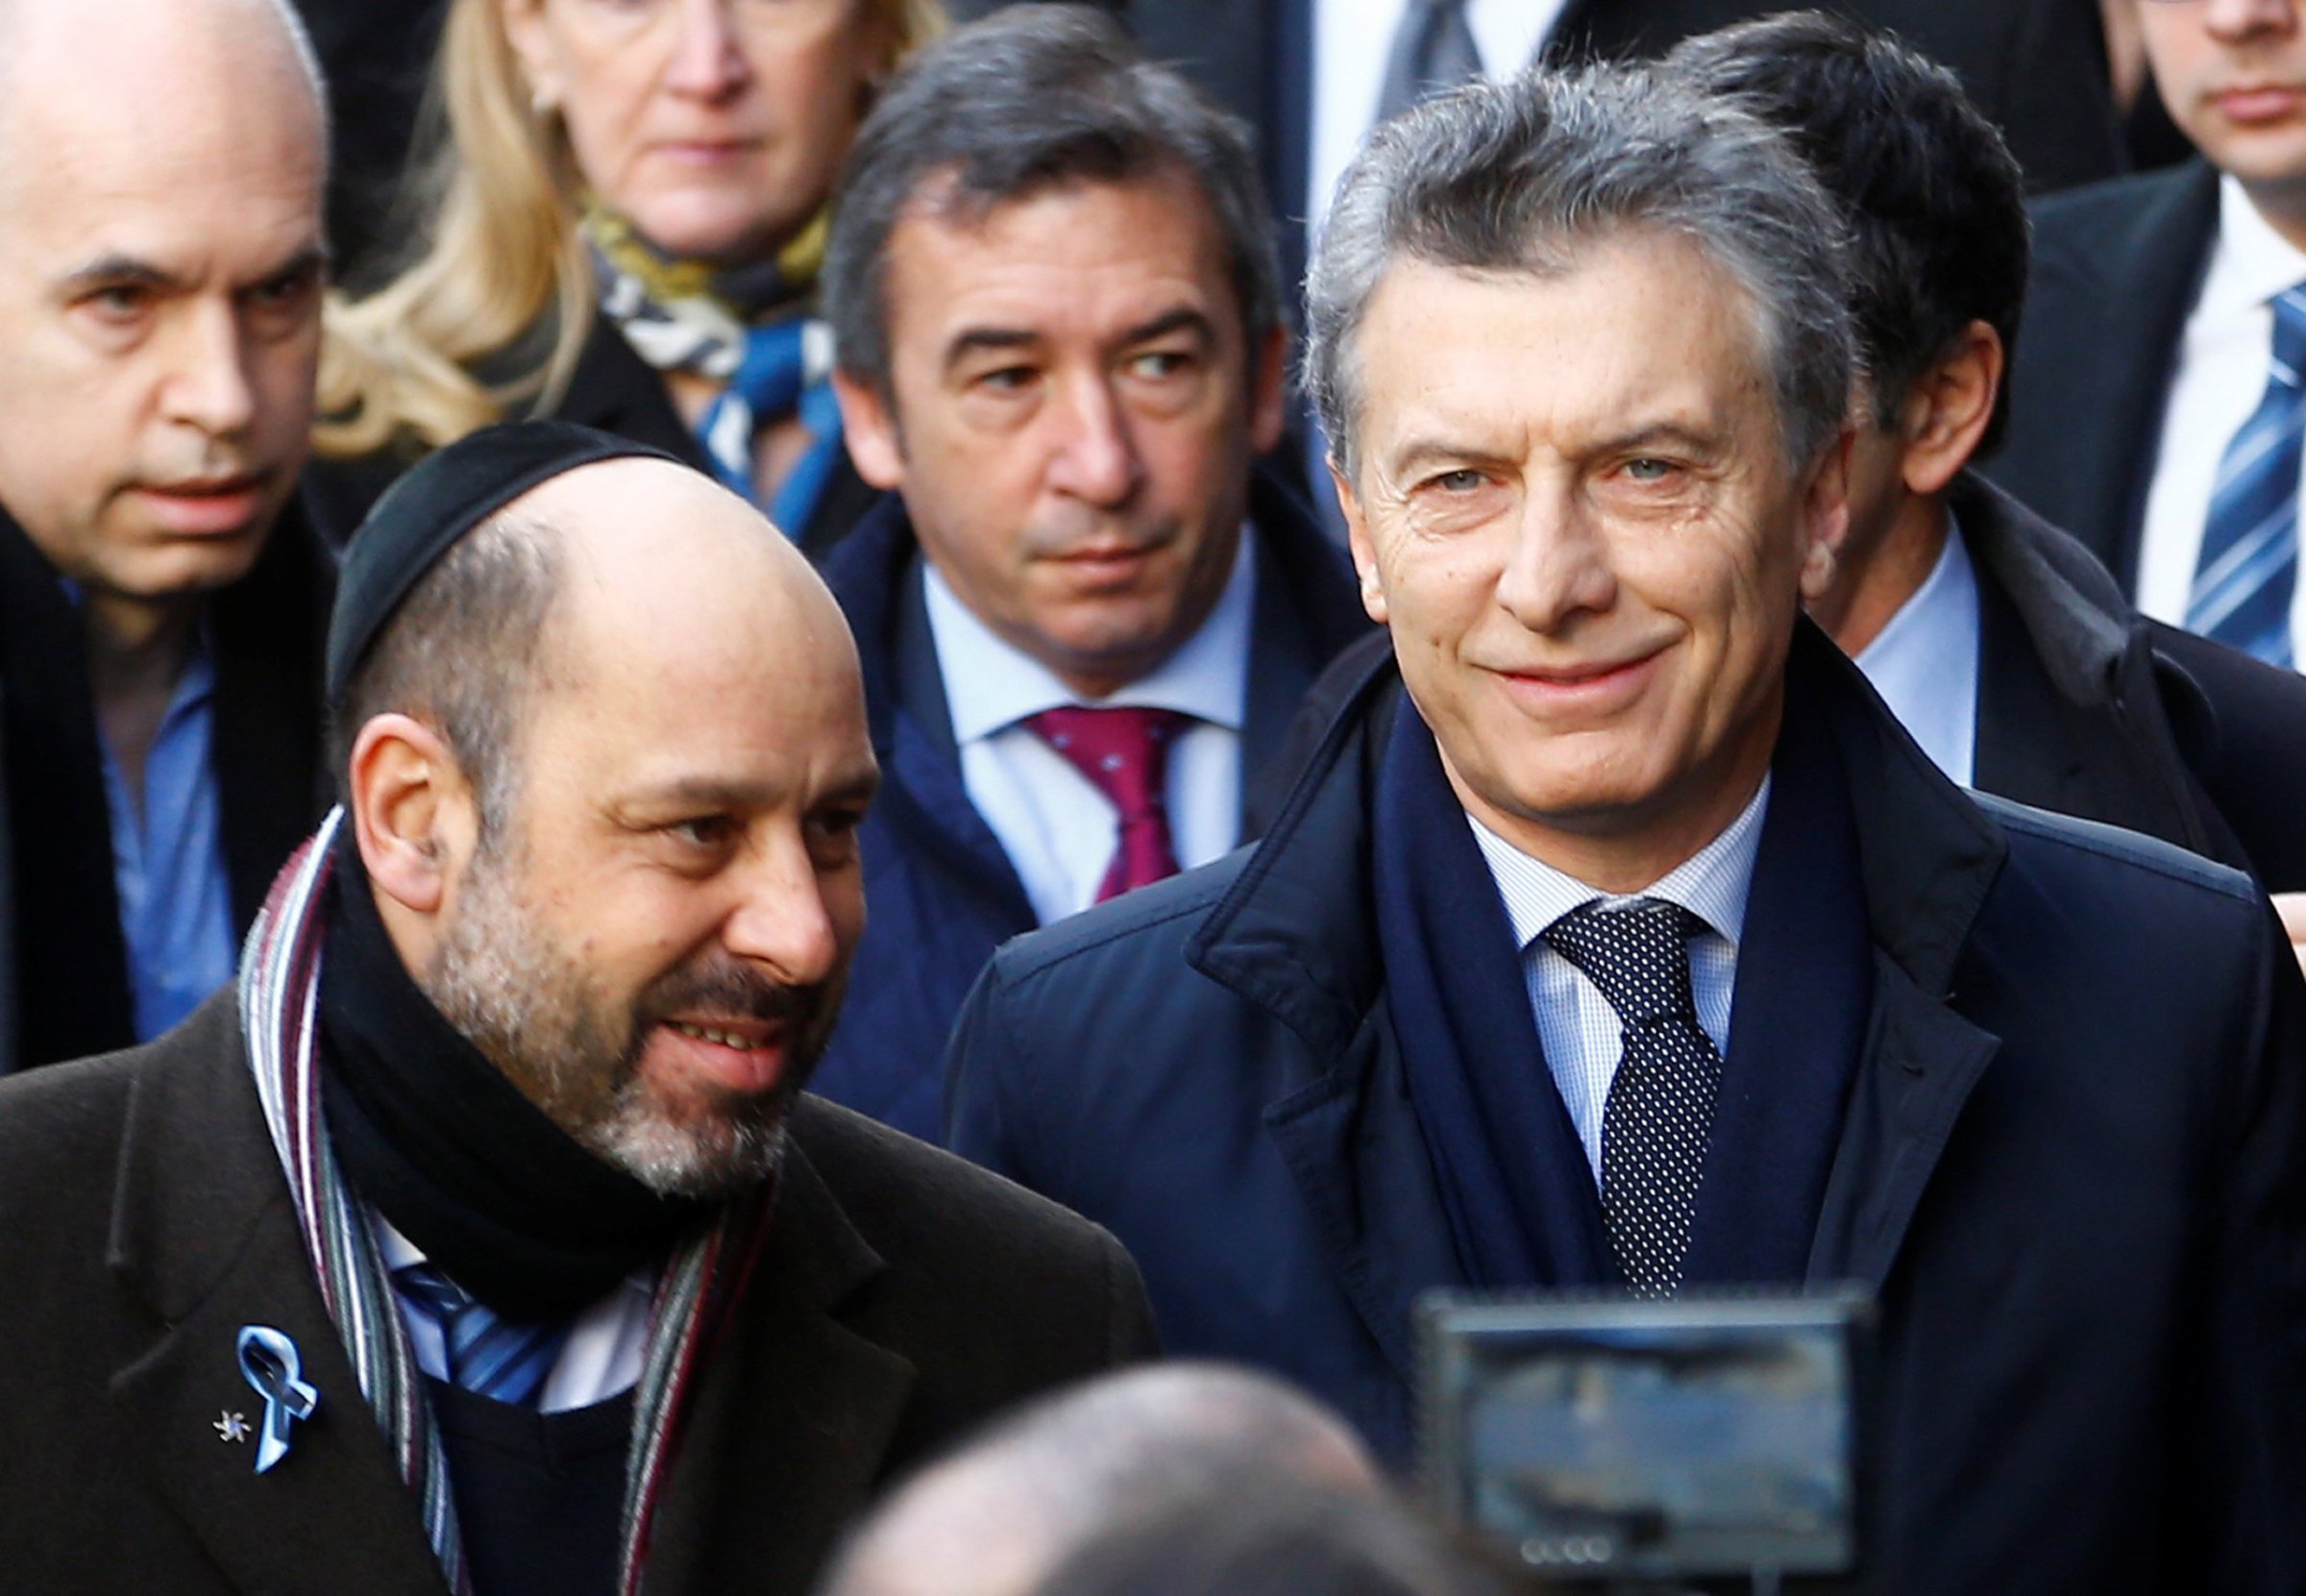 Argentine President Mauricio Macri accompanied by AMIA's Vice President Ralph Thomas Saieg arrives to attend a ceremony marking the 22nd anniversary of the 1994 attack that left 85 dead at the AMIA Jewish center in Buenos Aires, on July 18, 2016.